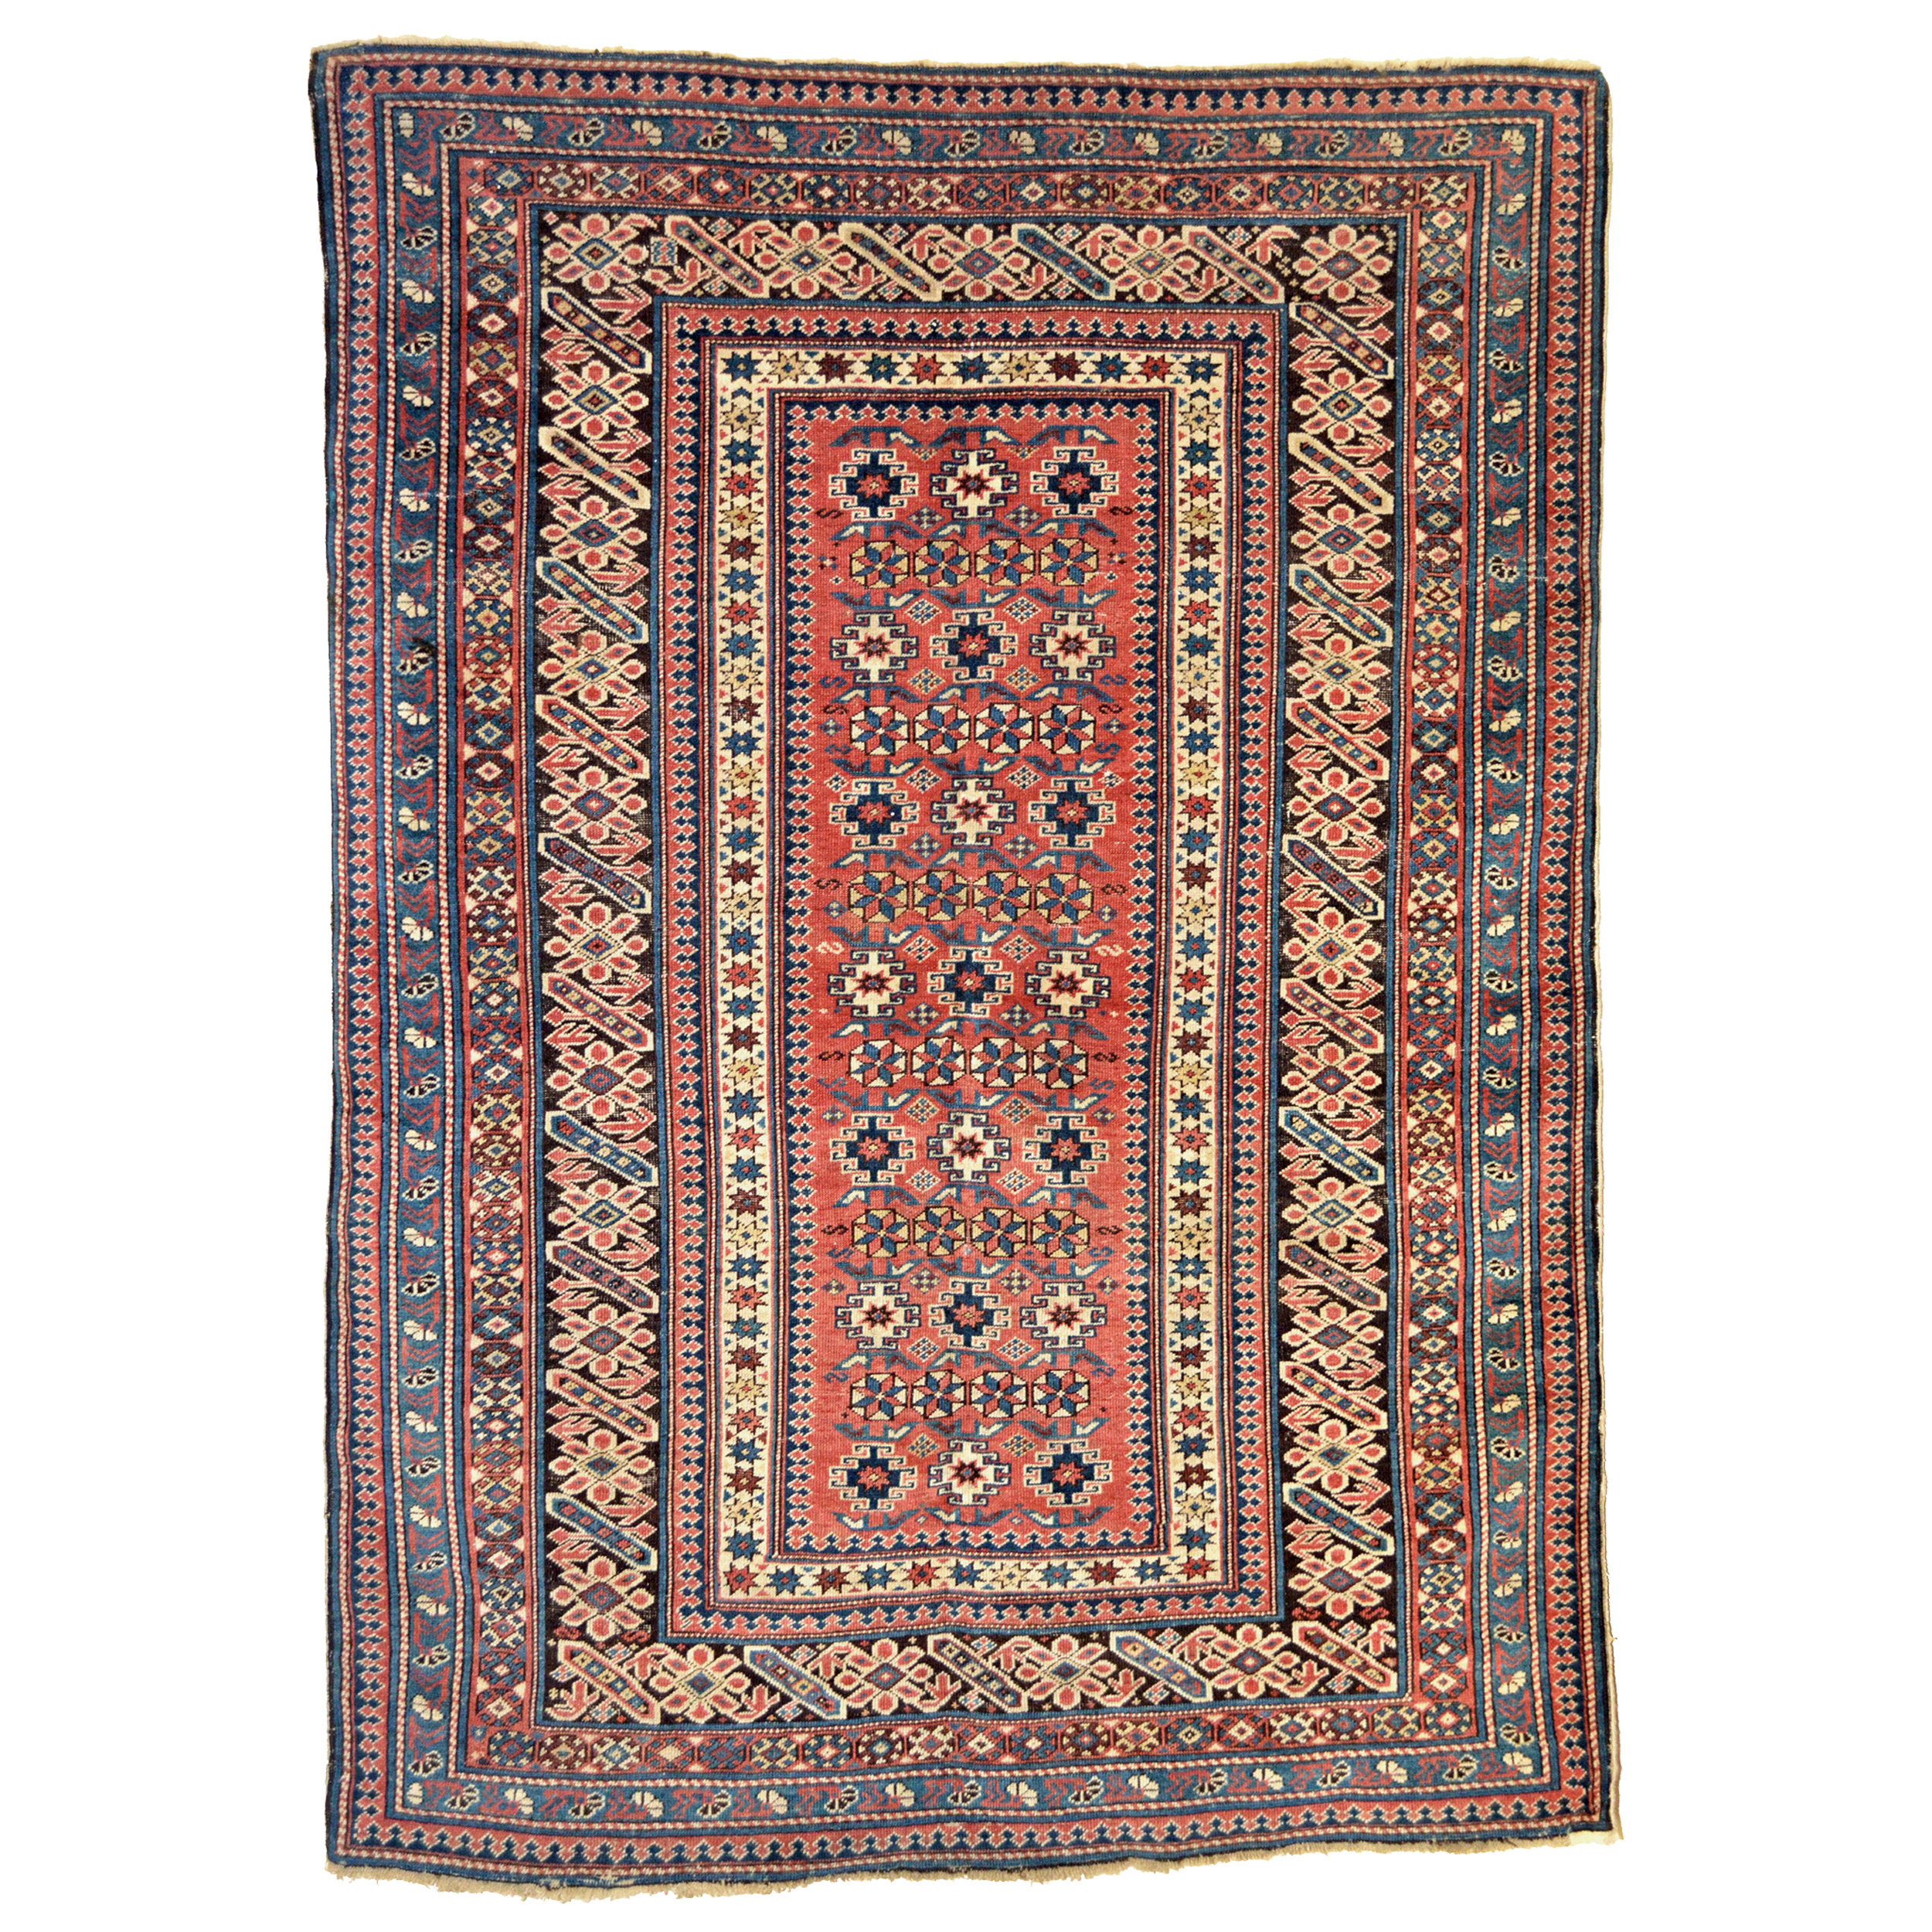 An antique Chi Chi rug from the northeast Caucasus. The salmon color field is decorated with stylized flowerheads and geometric form in shades of ivory, teal, yellow, aubergine and mid blue. An oxidized brown border in the classic Chi Chi style is complemented by an ivory interior guard border, two Reciprocal Trefoil guard borders and two additional guard borders with various stylized flowers. Douglas Stock Gallery is the Boston area's most selective dealer in antique Oriental rugs and offers a selection of antique Caucasian rugs, Persian village rugs, tribal rugs and city rugs, and new, hand woven rugs utilizing natural dyes. Oriental rugs Boston, Brookline, Newton, Weston, Wellesley, Needham, Natick,MA area New England, antique rugs New York by appointment.